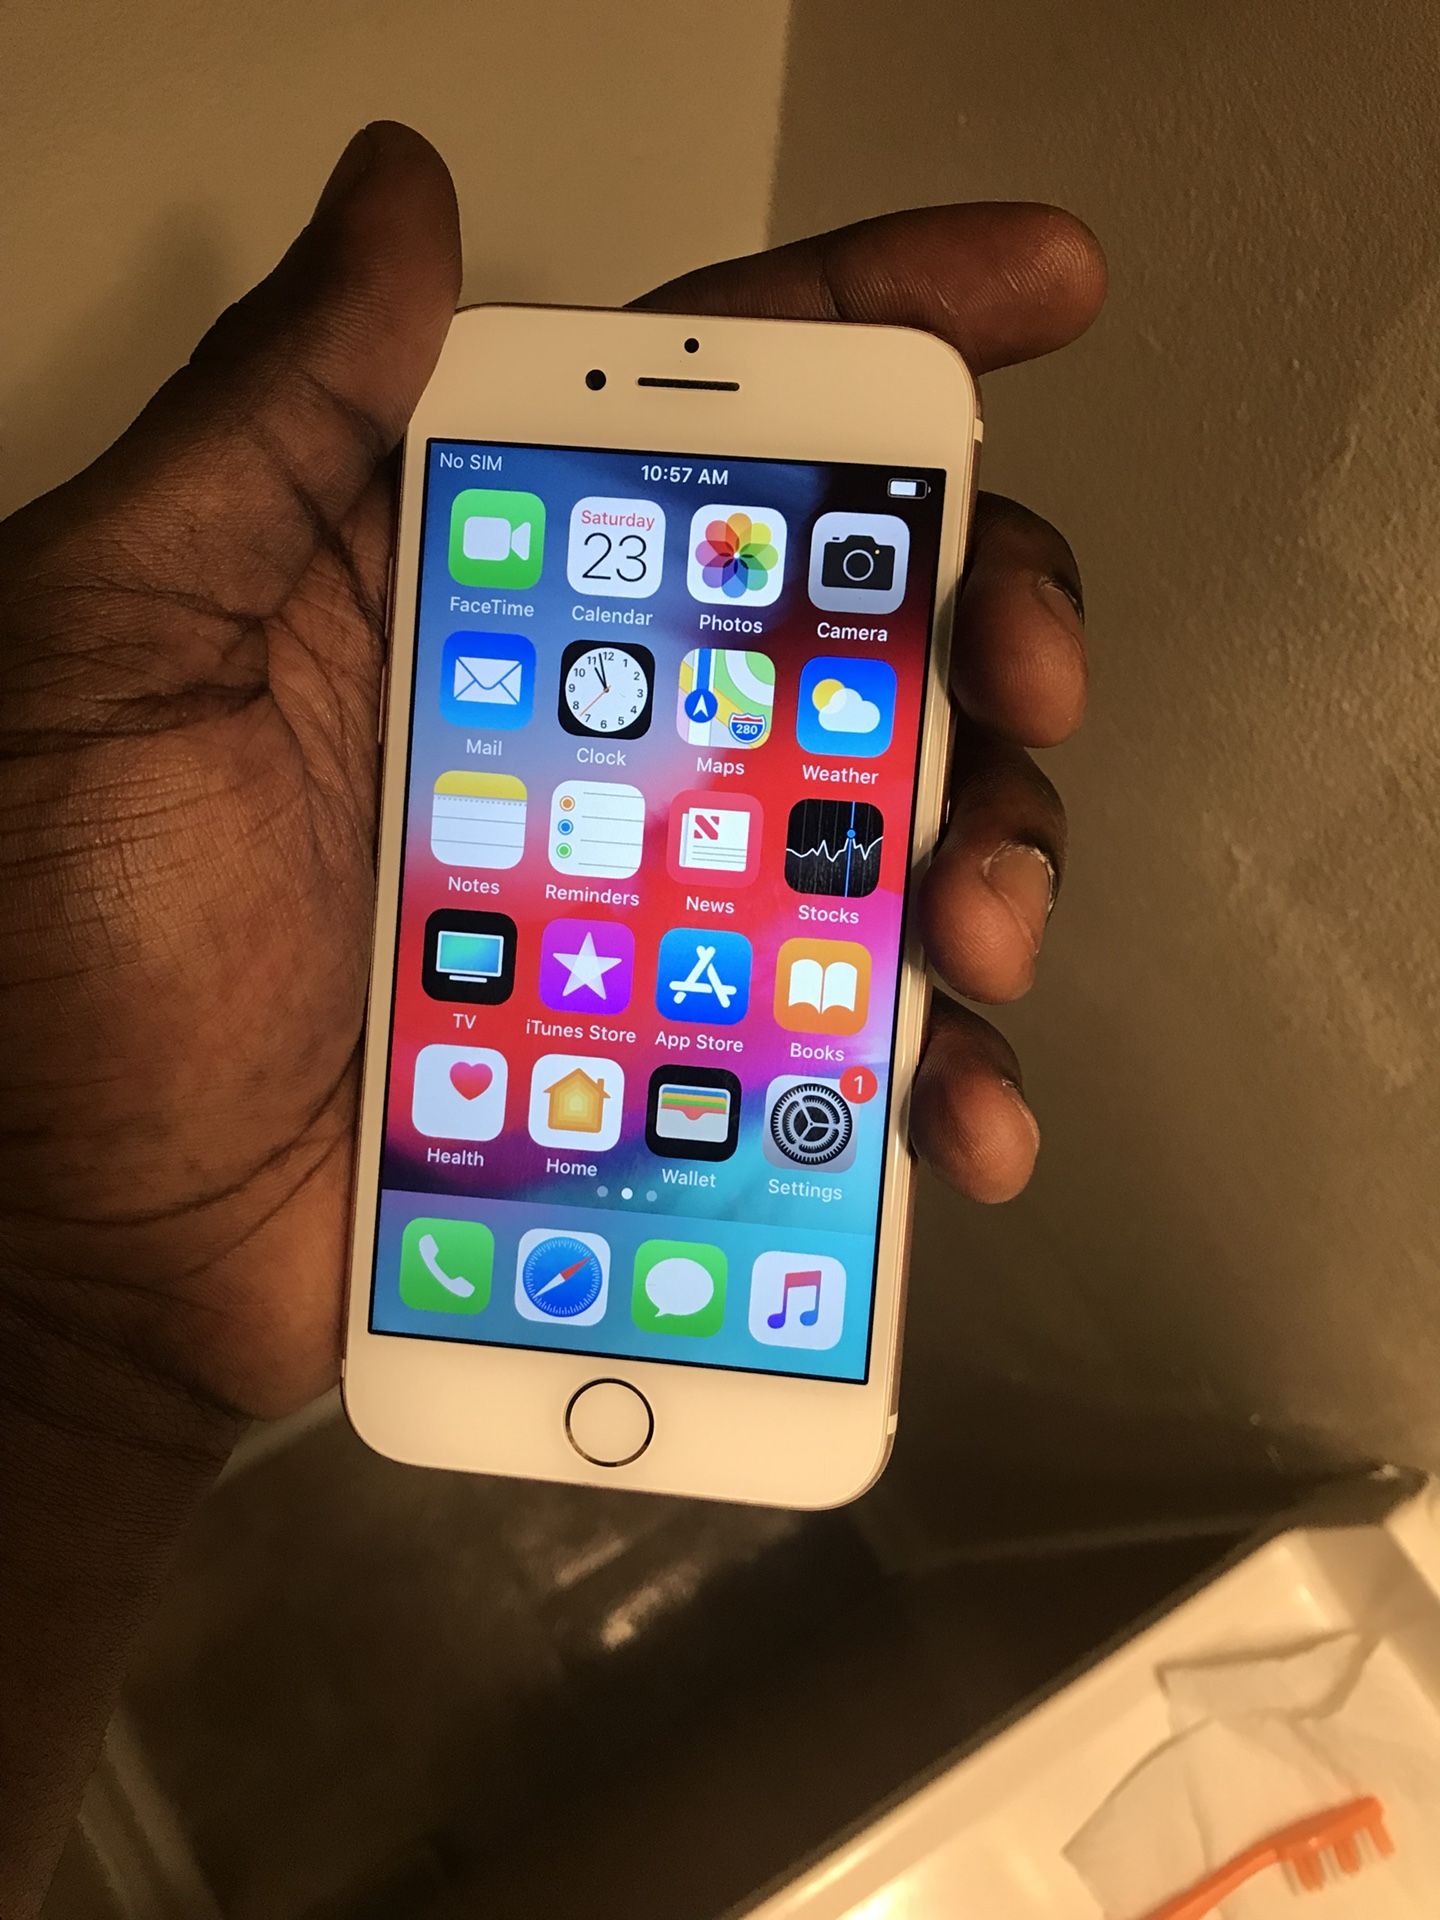 iphone 7 32 GB UNLOCKED for any service! $200 firm